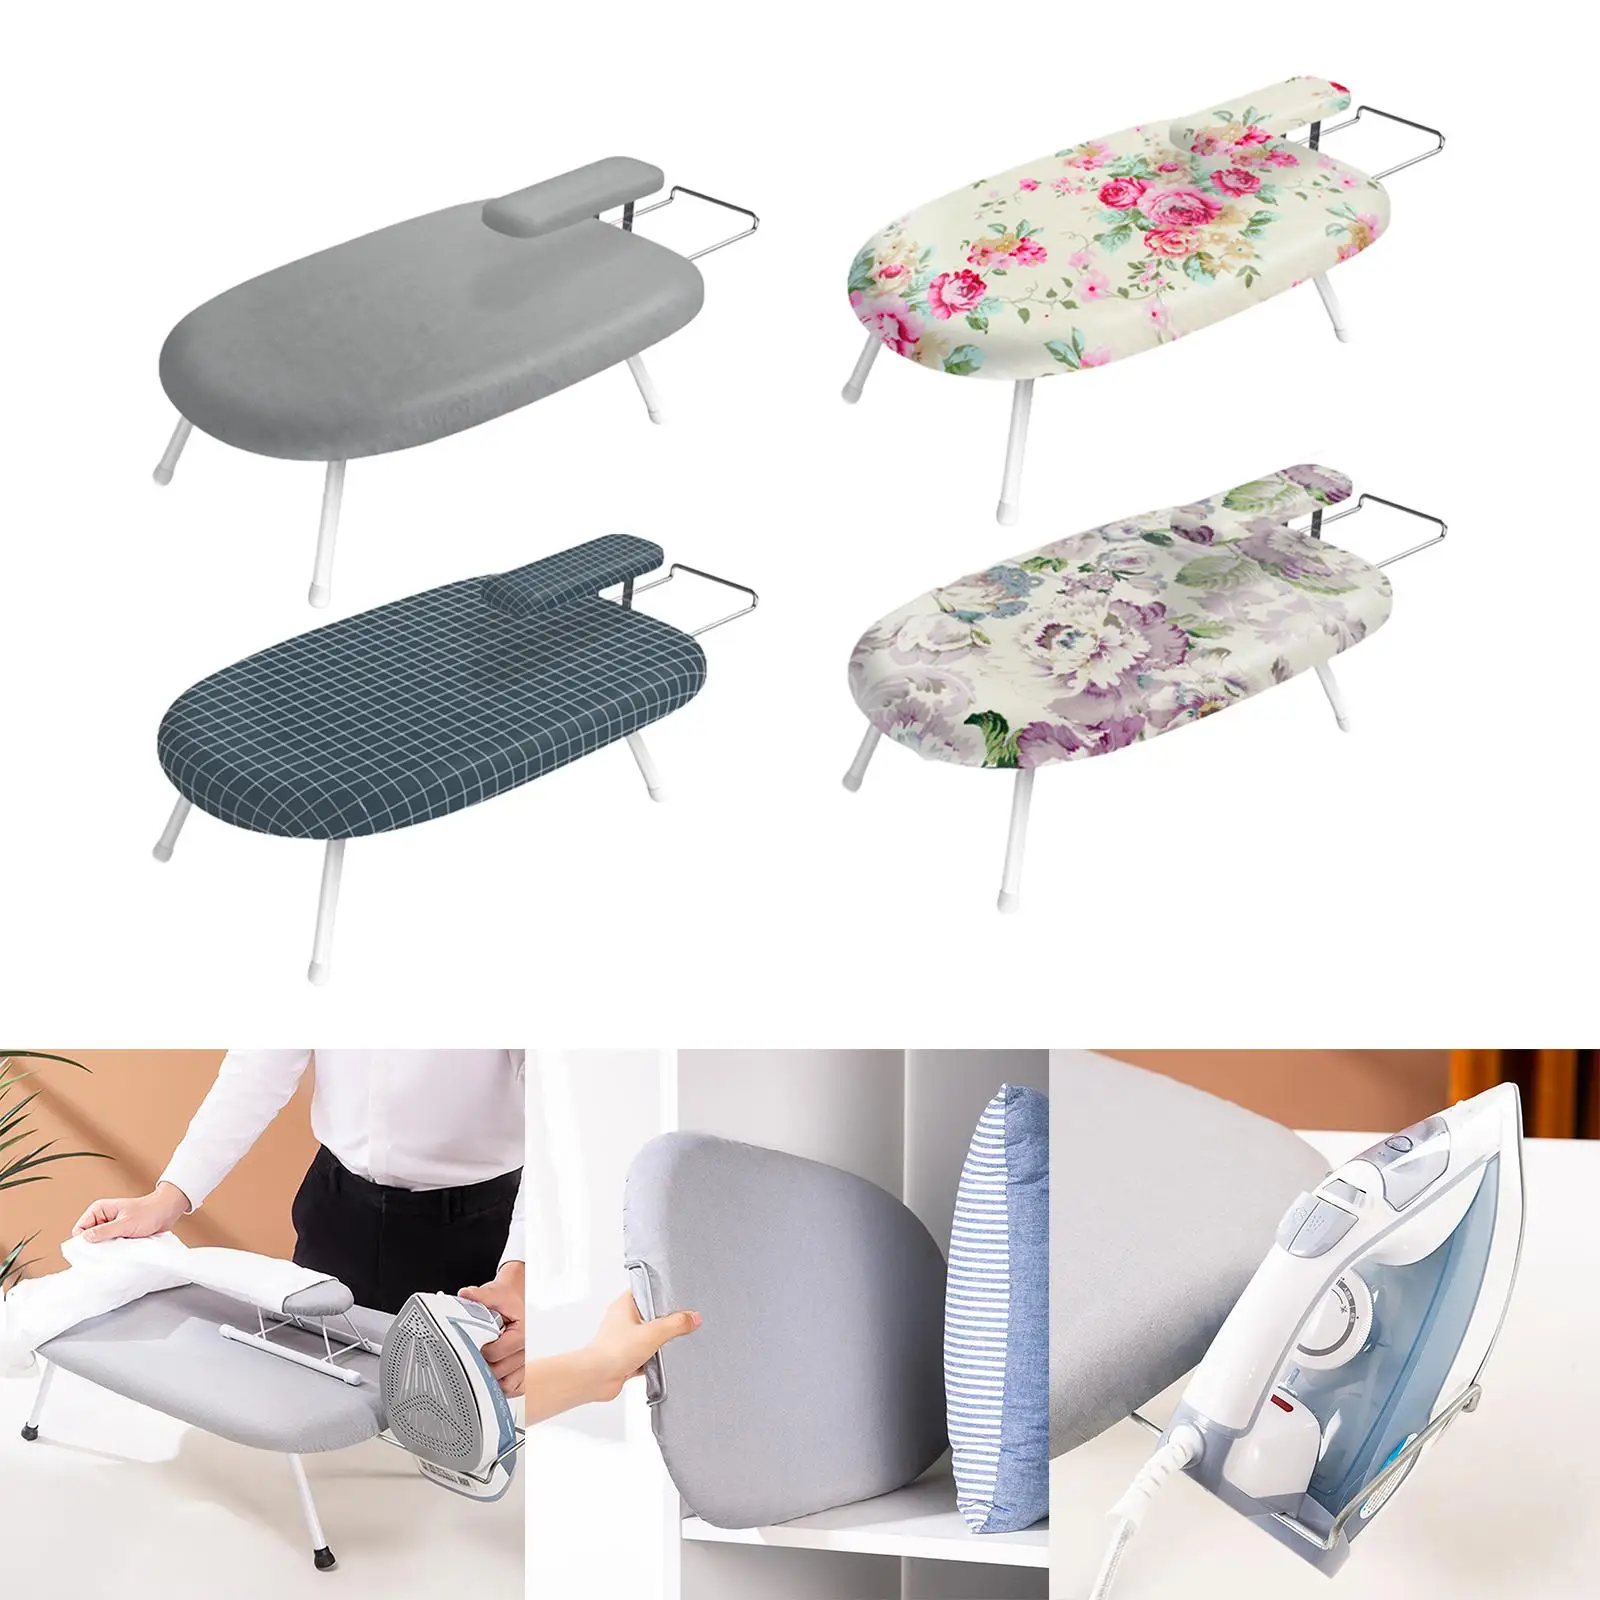 Tabletop Ironing Board Removable Sleeve Folding Portable for Home Ironing Clothes